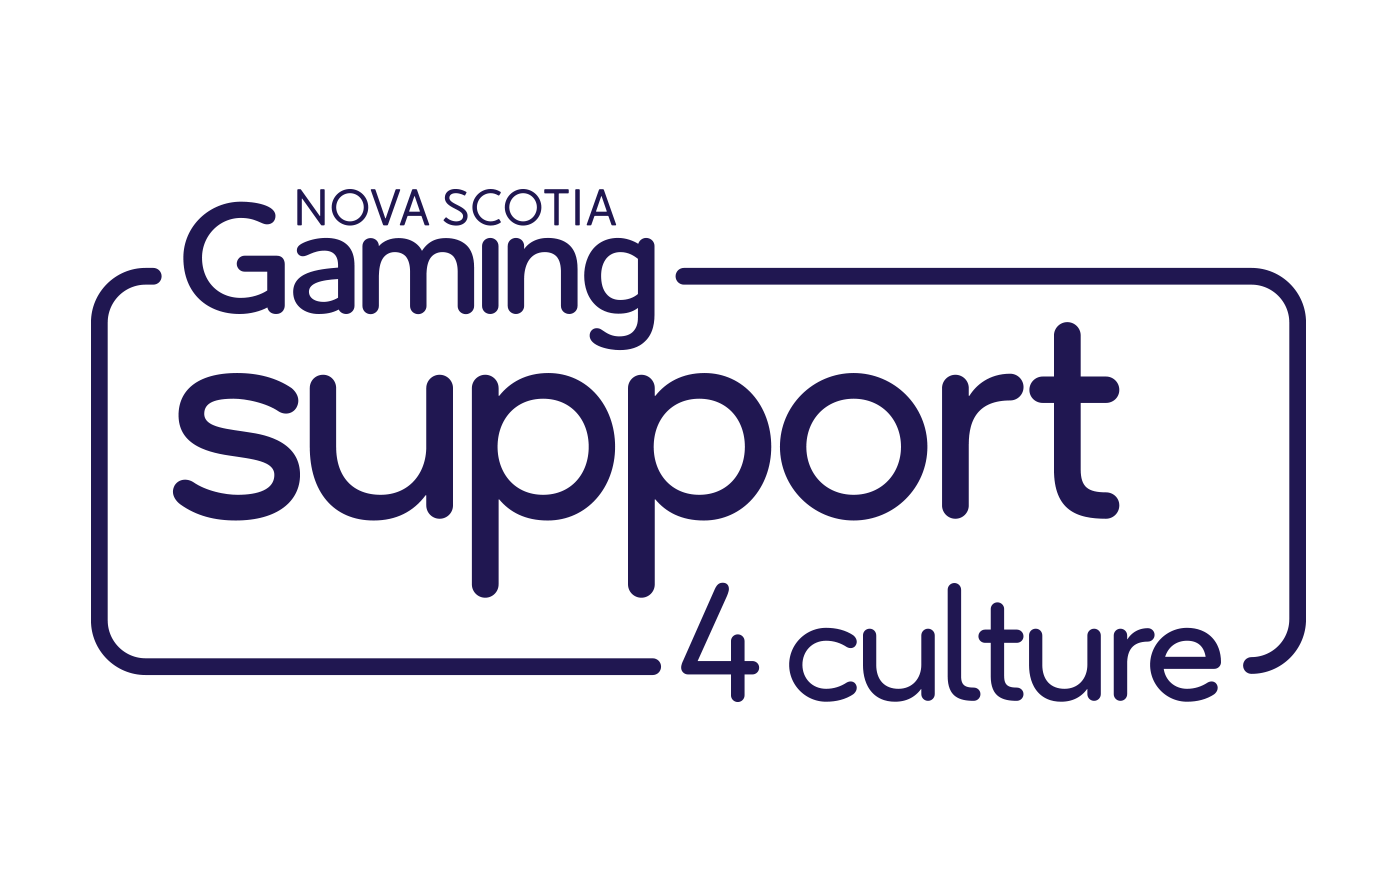 Support 4 Culture logo